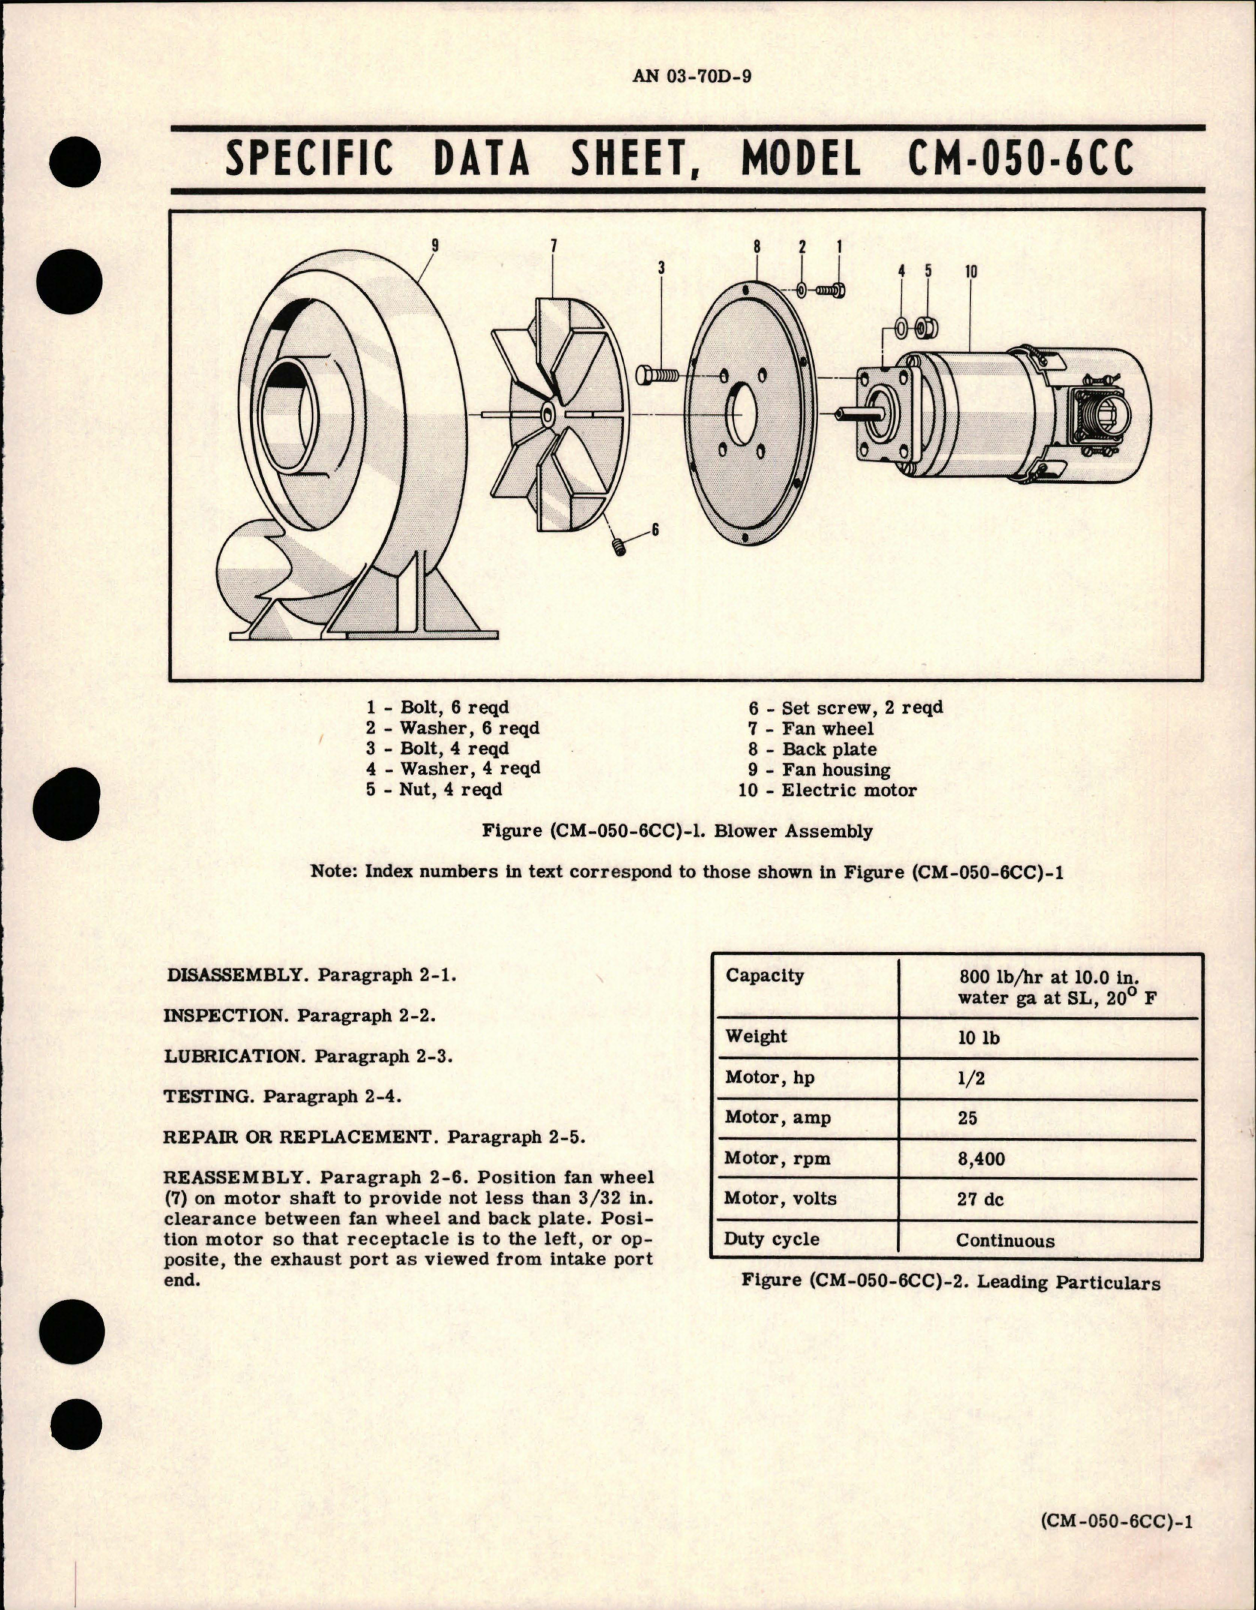 Sample page 5 from AirCorps Library document: Overhaul Instructions for Blower Assemblies - Models CM-050-6CC, 1107, 1116, 1149, and SA-250-6FC